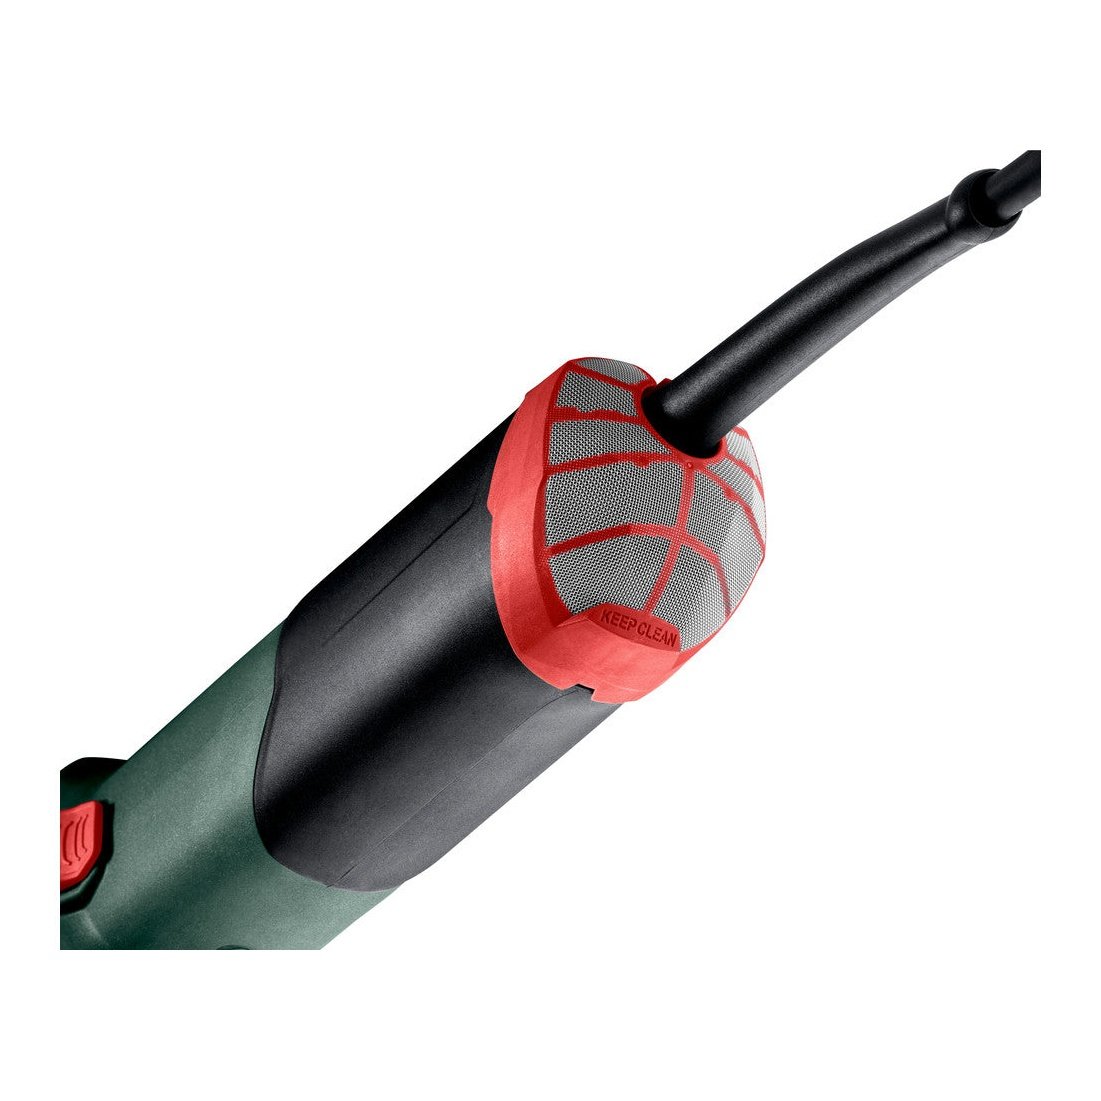 METABO 1900W 125MM VARIABLE SPEED ANGLE GRINDER WEV19-125QMBRUSH tool-junction-nz